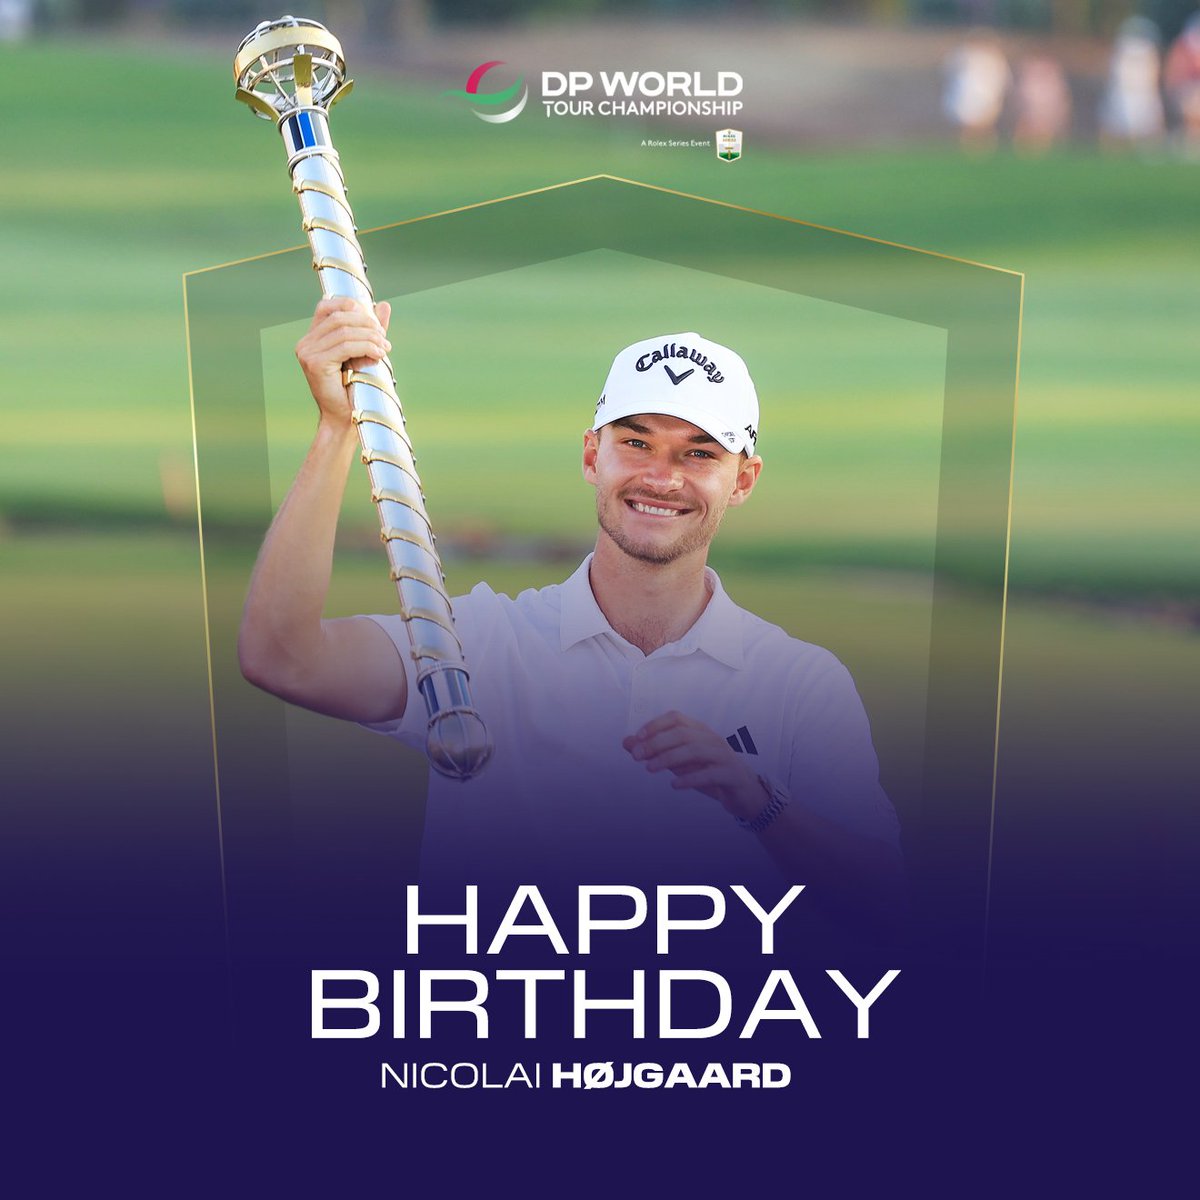 Happy birthday to our defending champion, Nicolai Højgaard! #DPWTC #RolexSeries